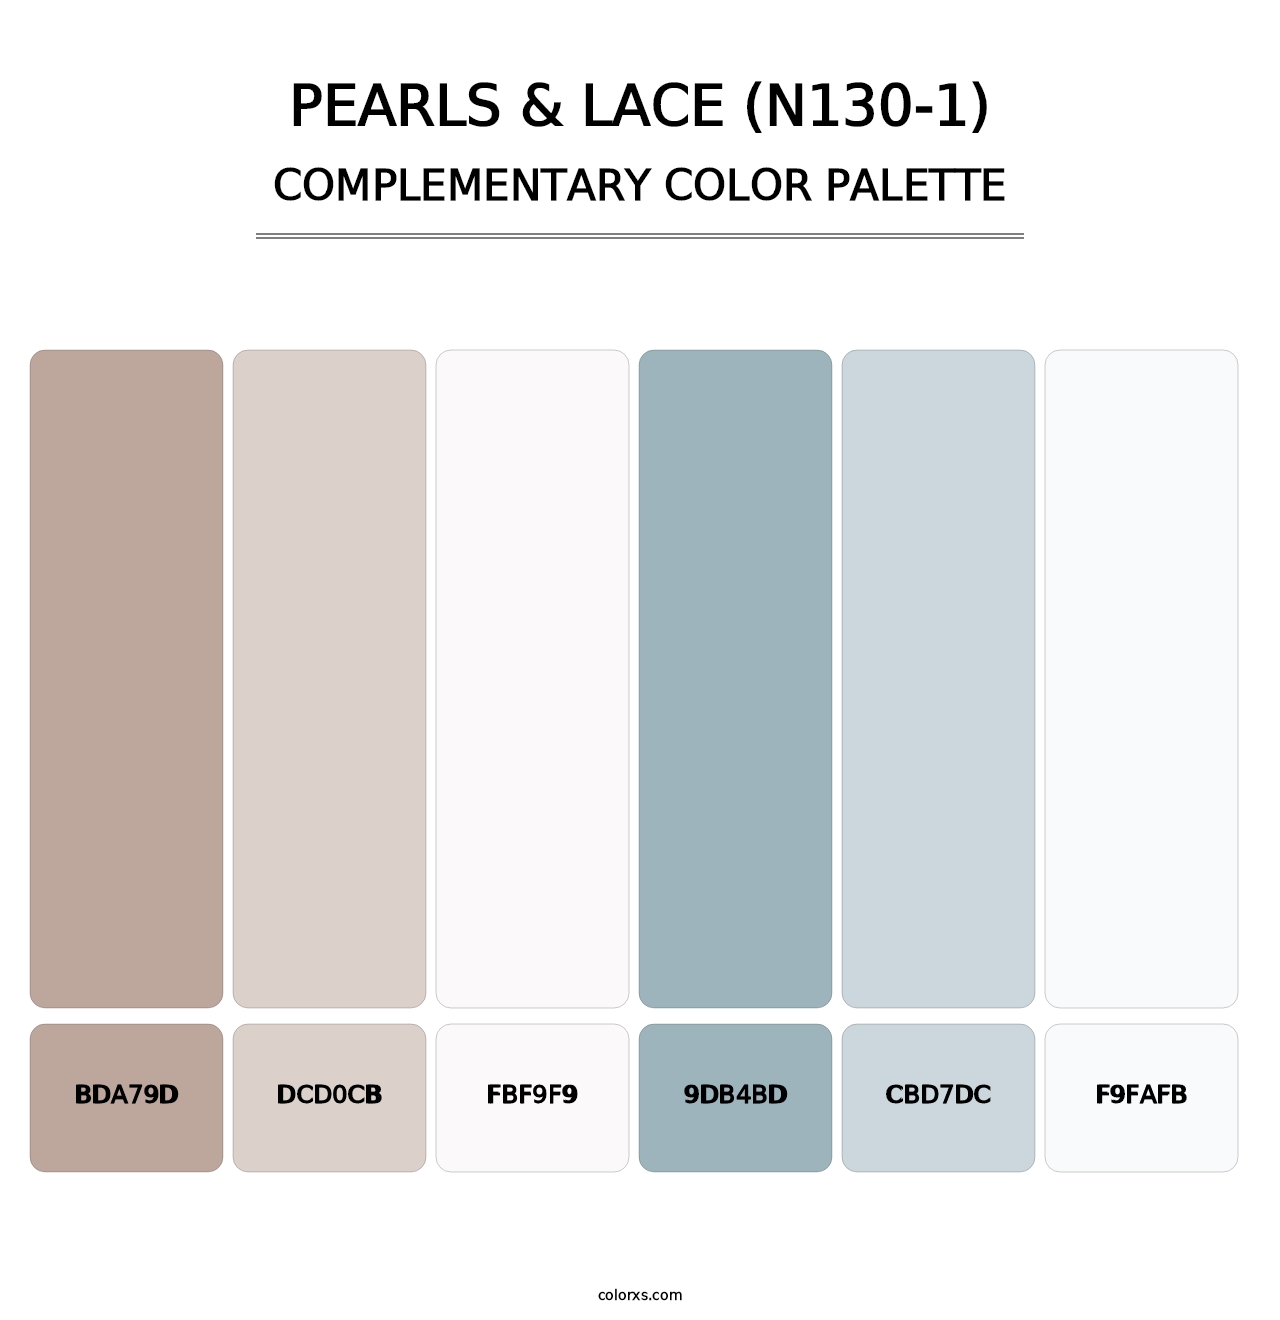 Pearls & Lace (N130-1) - Complementary Color Palette